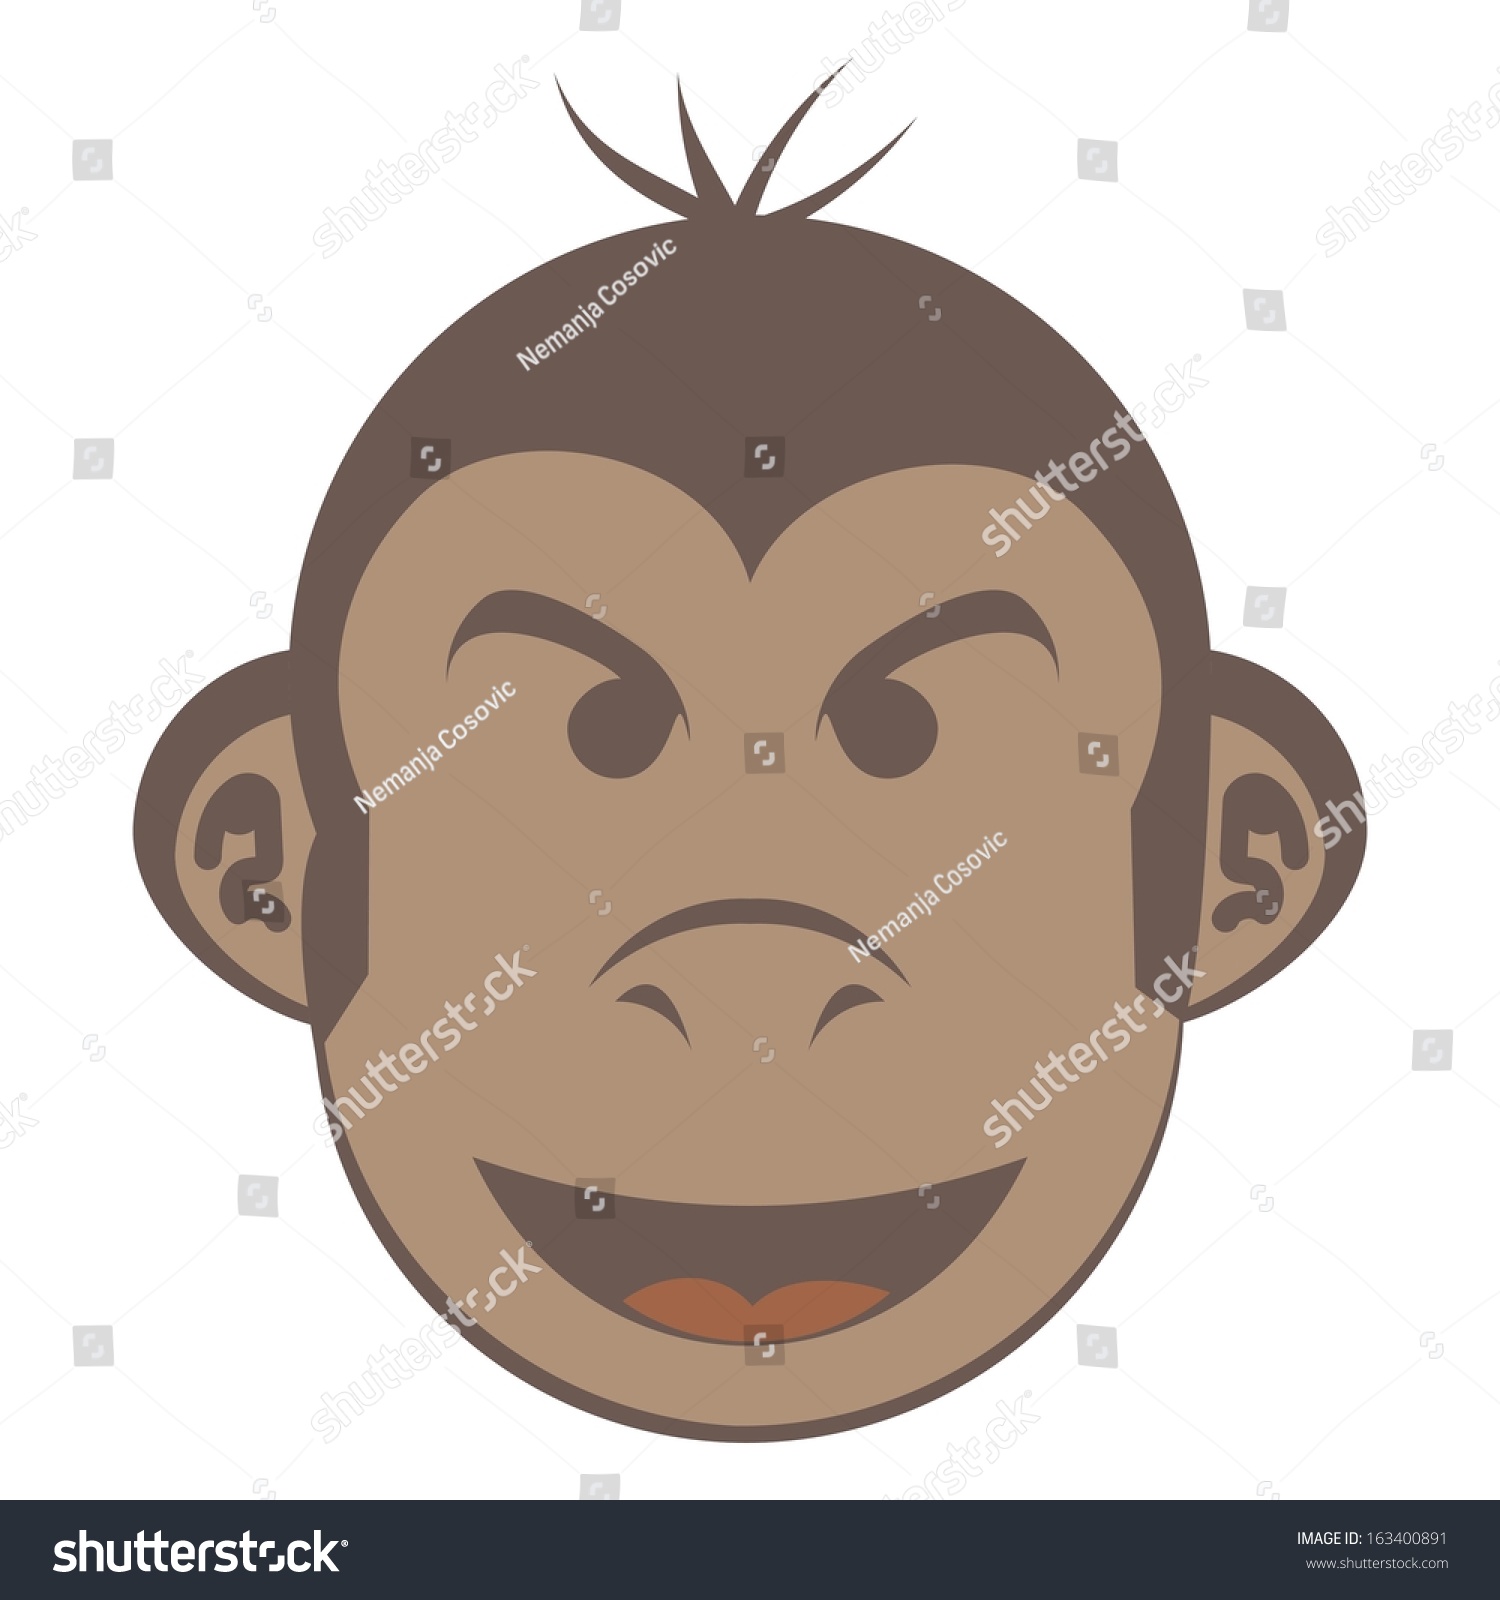 Save to a lightbox - stock-vector-evil-monkey-face-funny-cartoon-style-163400891